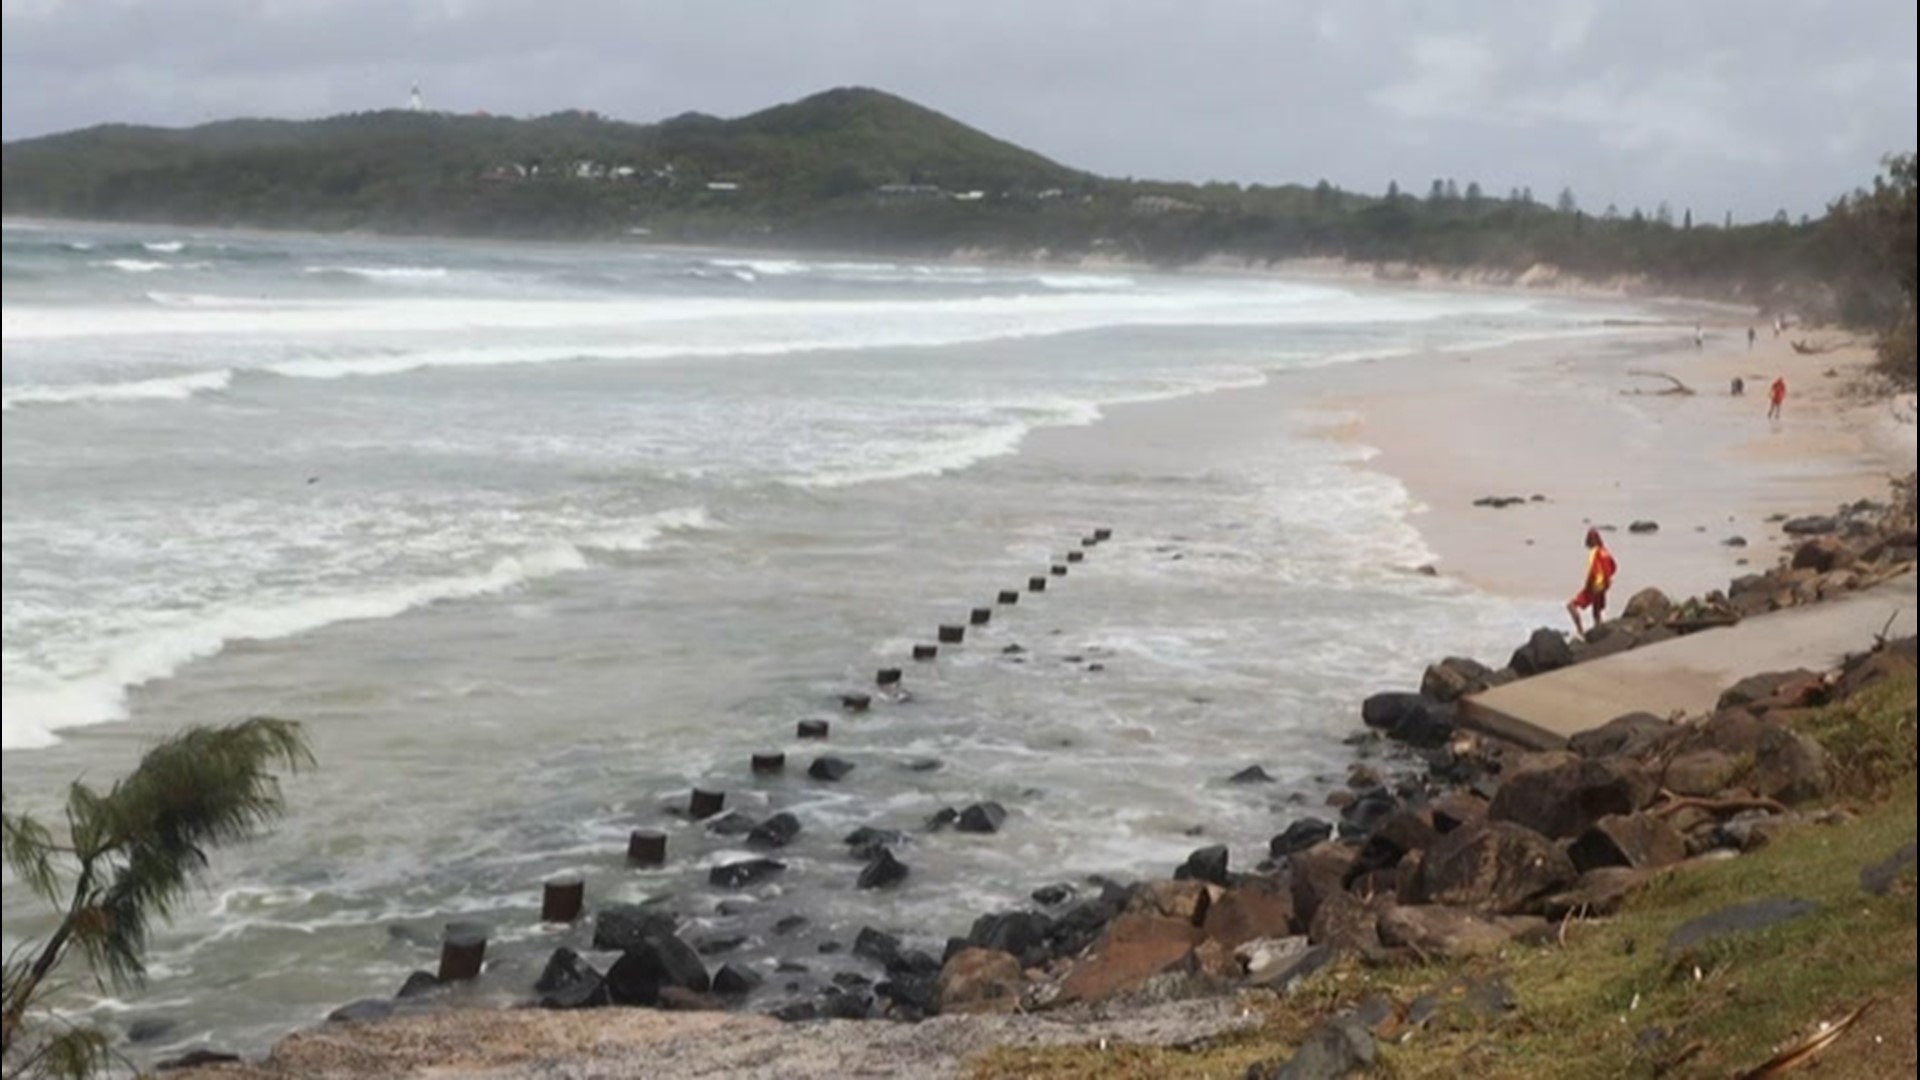 Byron's Bay Beach is a popular spot in New South Wales, Australia, but coastal erosion has caused the beach to shrink, resulting in it closing to the public.